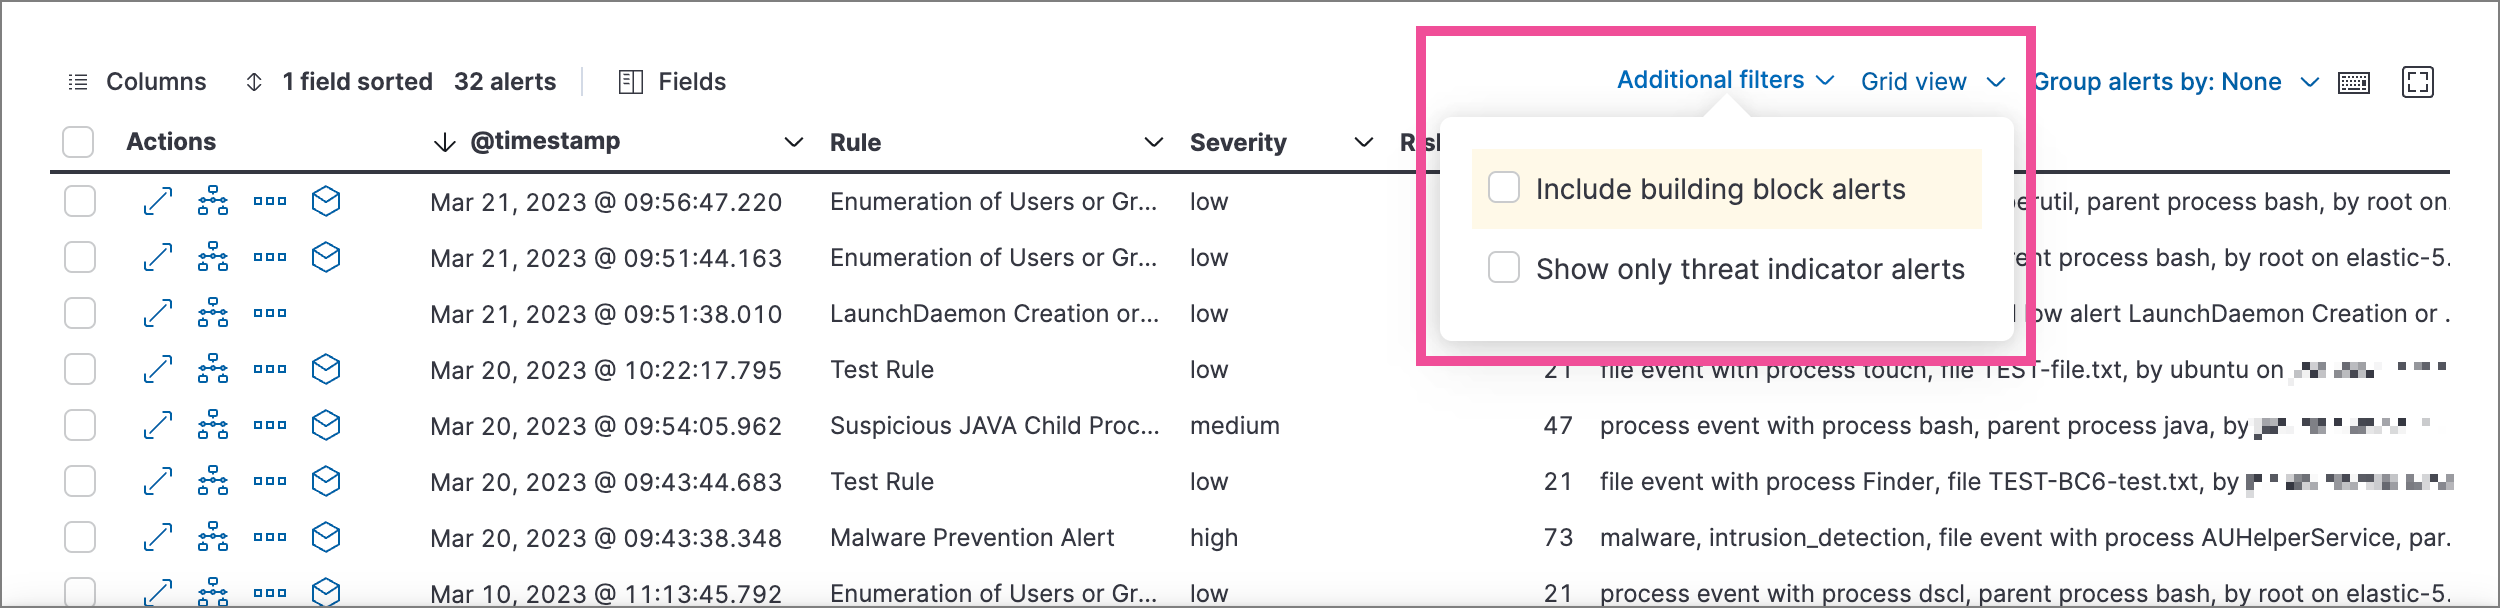 Alerts table with Additional filters menu highlighted